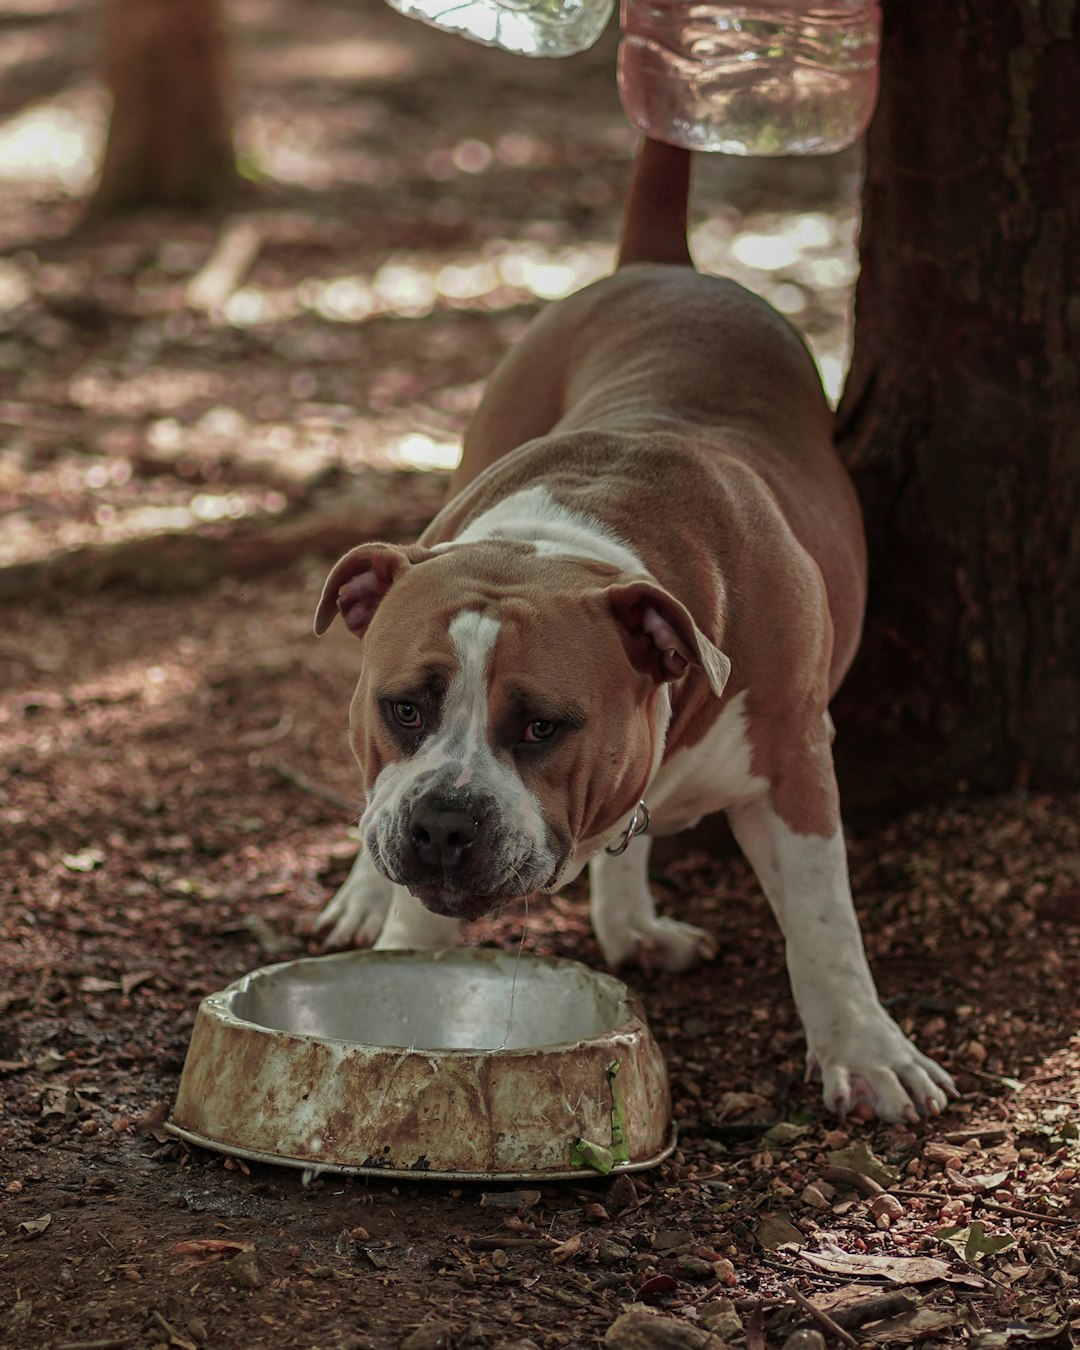 brown and white short coated dog eating on green round bowl